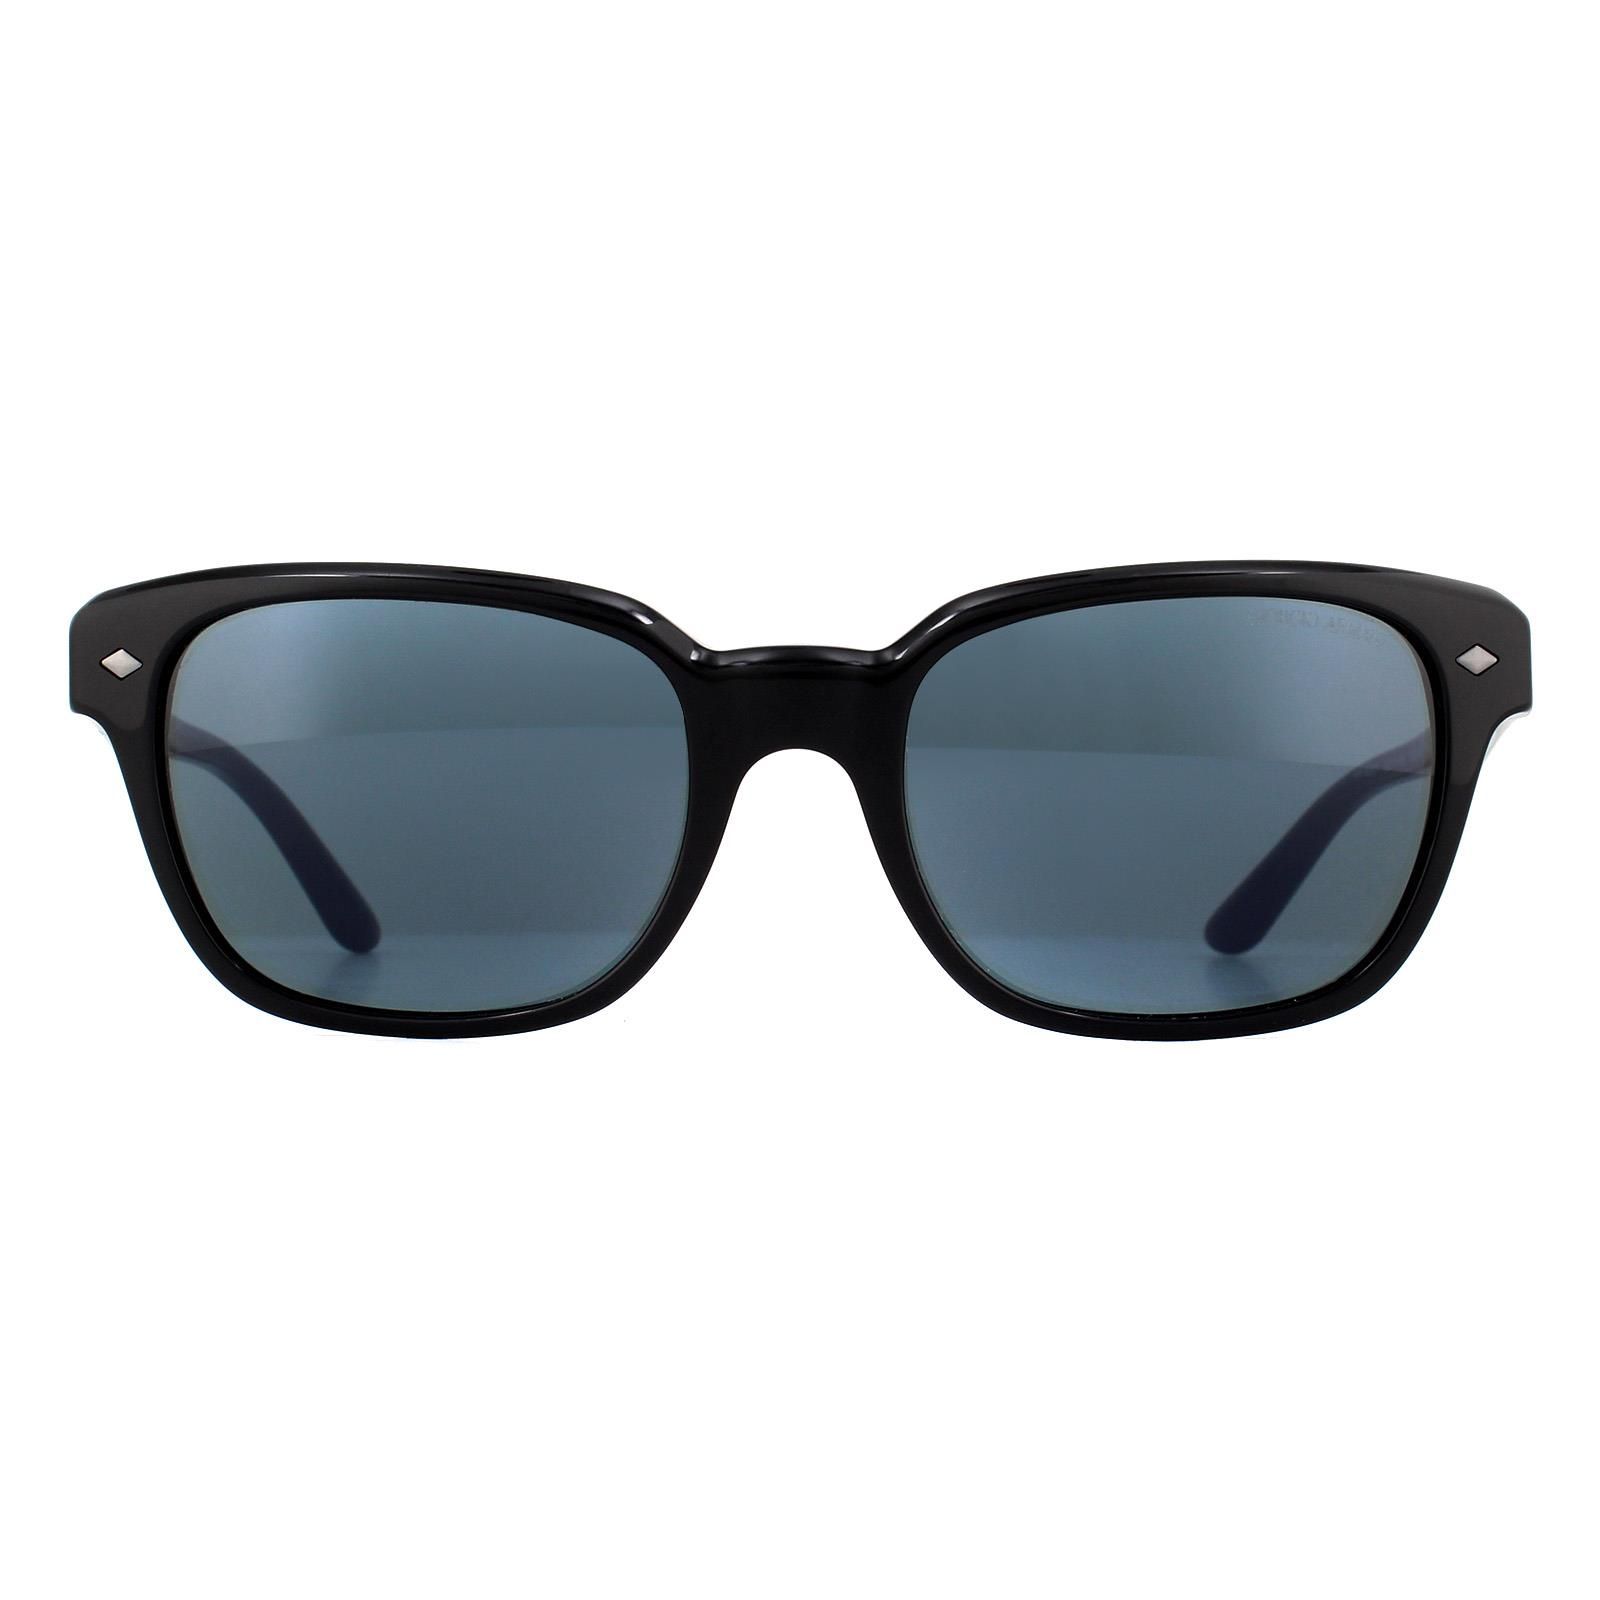 Giorgio Armani Sunglasses AR8067 5017R5 Black Grey have a plastic frame which is a square shape and is for men